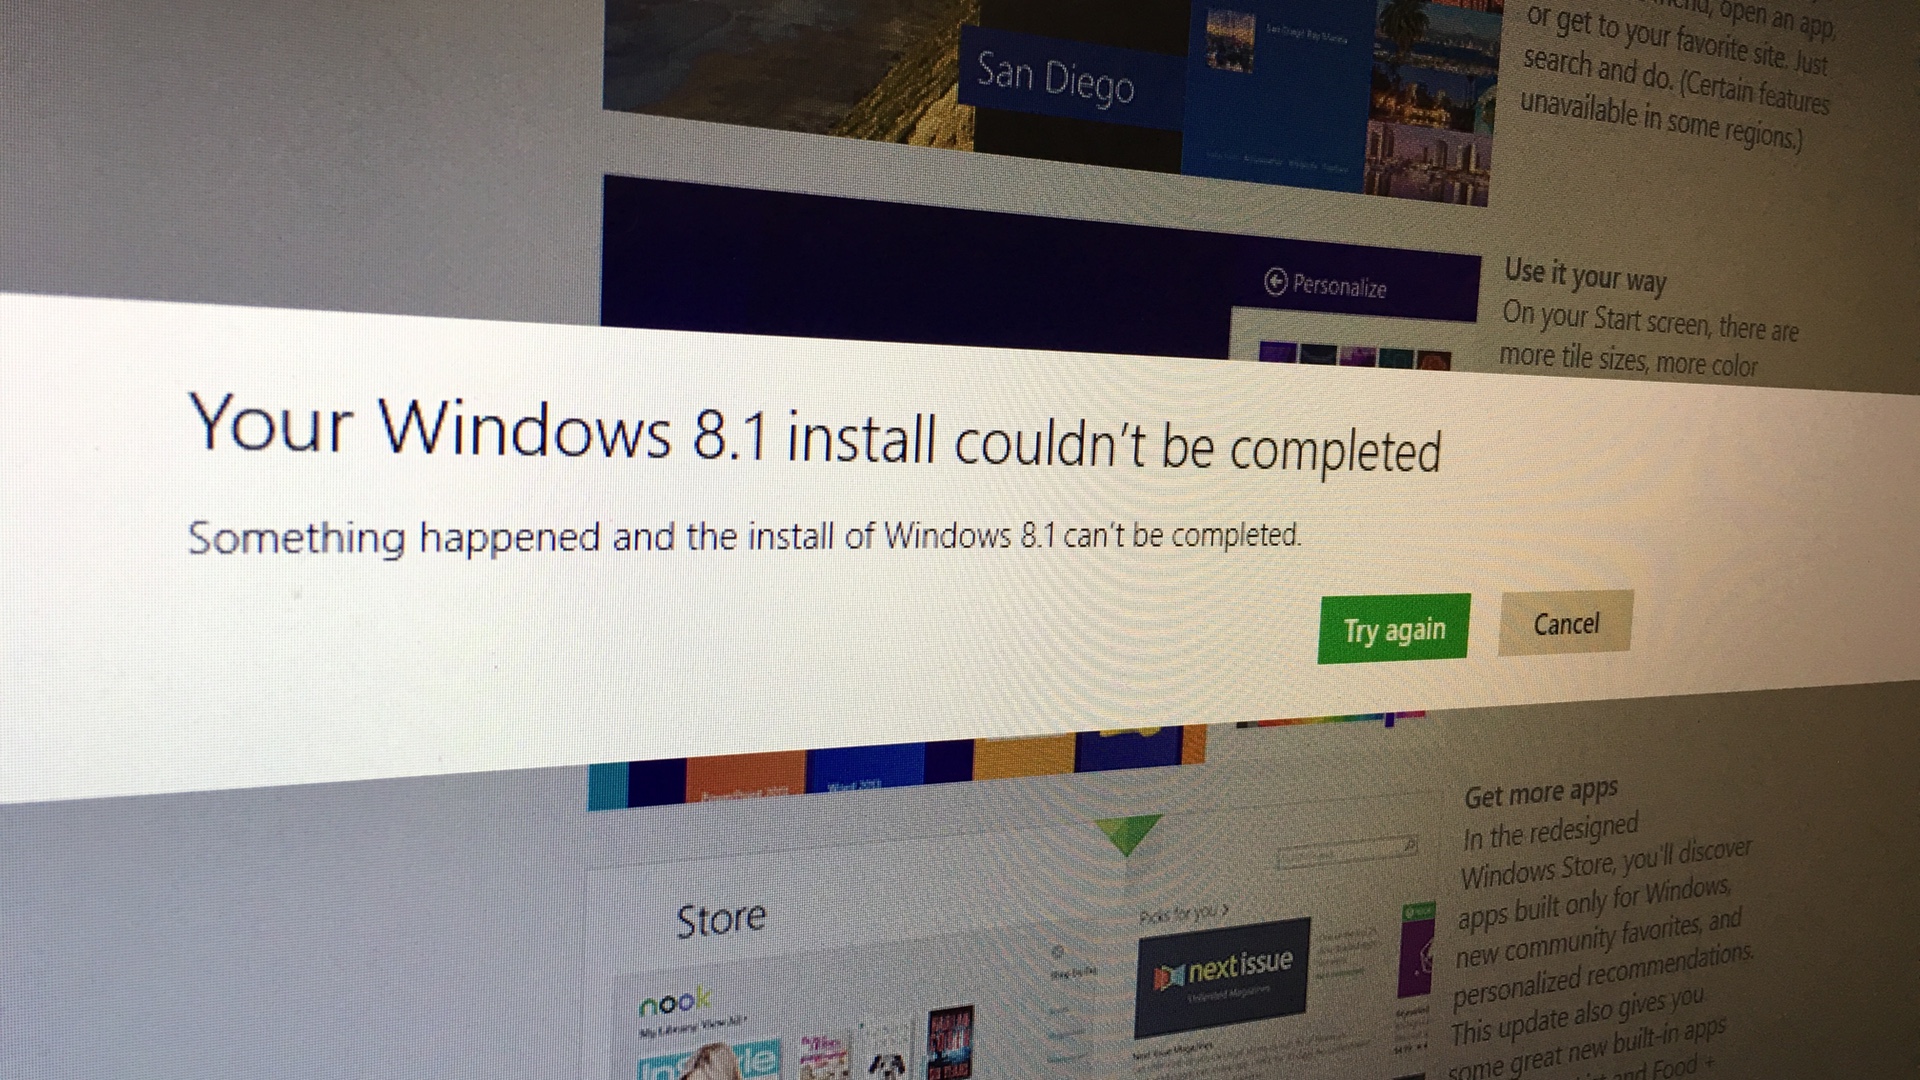 Windows 8.1 Install could not be completed